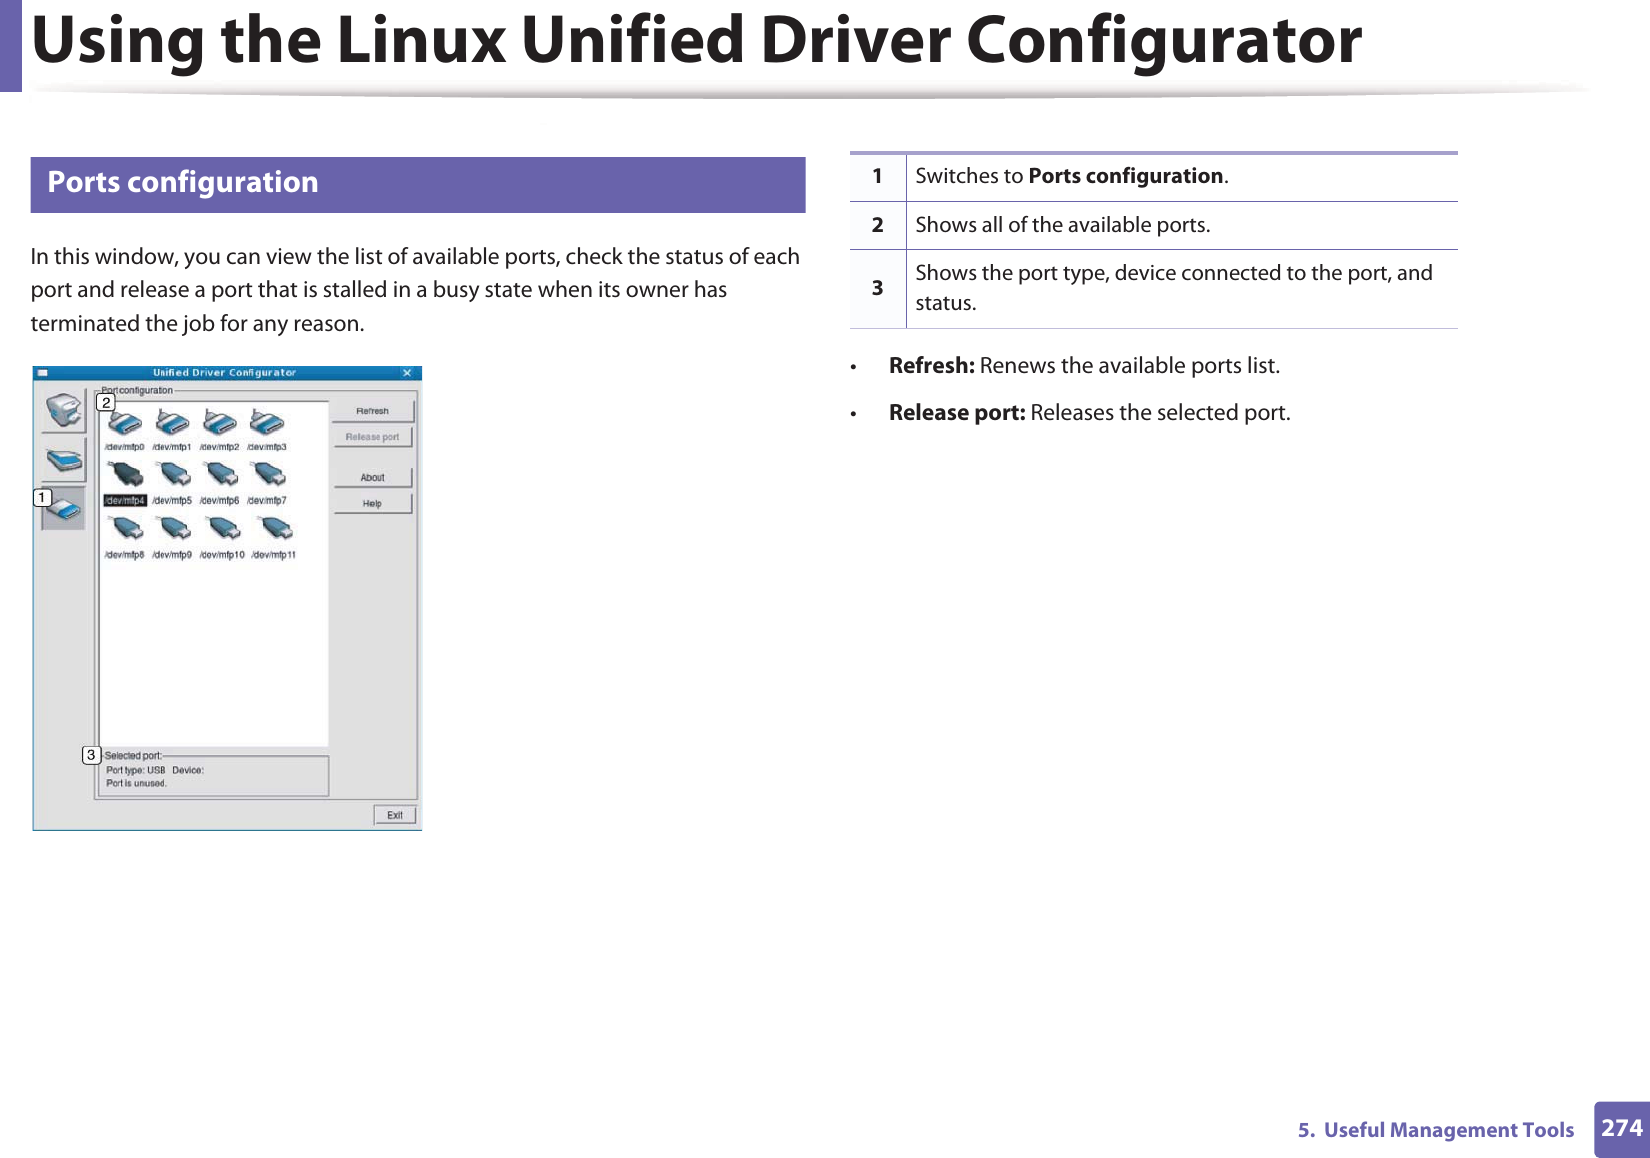 Using the Linux Unified Driver Configurator2745.  Useful Management Tools12 Ports configurationIn this window, you can view the list of available ports, check the status of each port and release a port that is stalled in a busy state when its owner has terminated the job for any reason.•Refresh: Renews the available ports list.•Release port: Releases the selected port.1Switches to Ports configuration.2Shows all of the available ports.3Shows the port type, device connected to the port, and status.